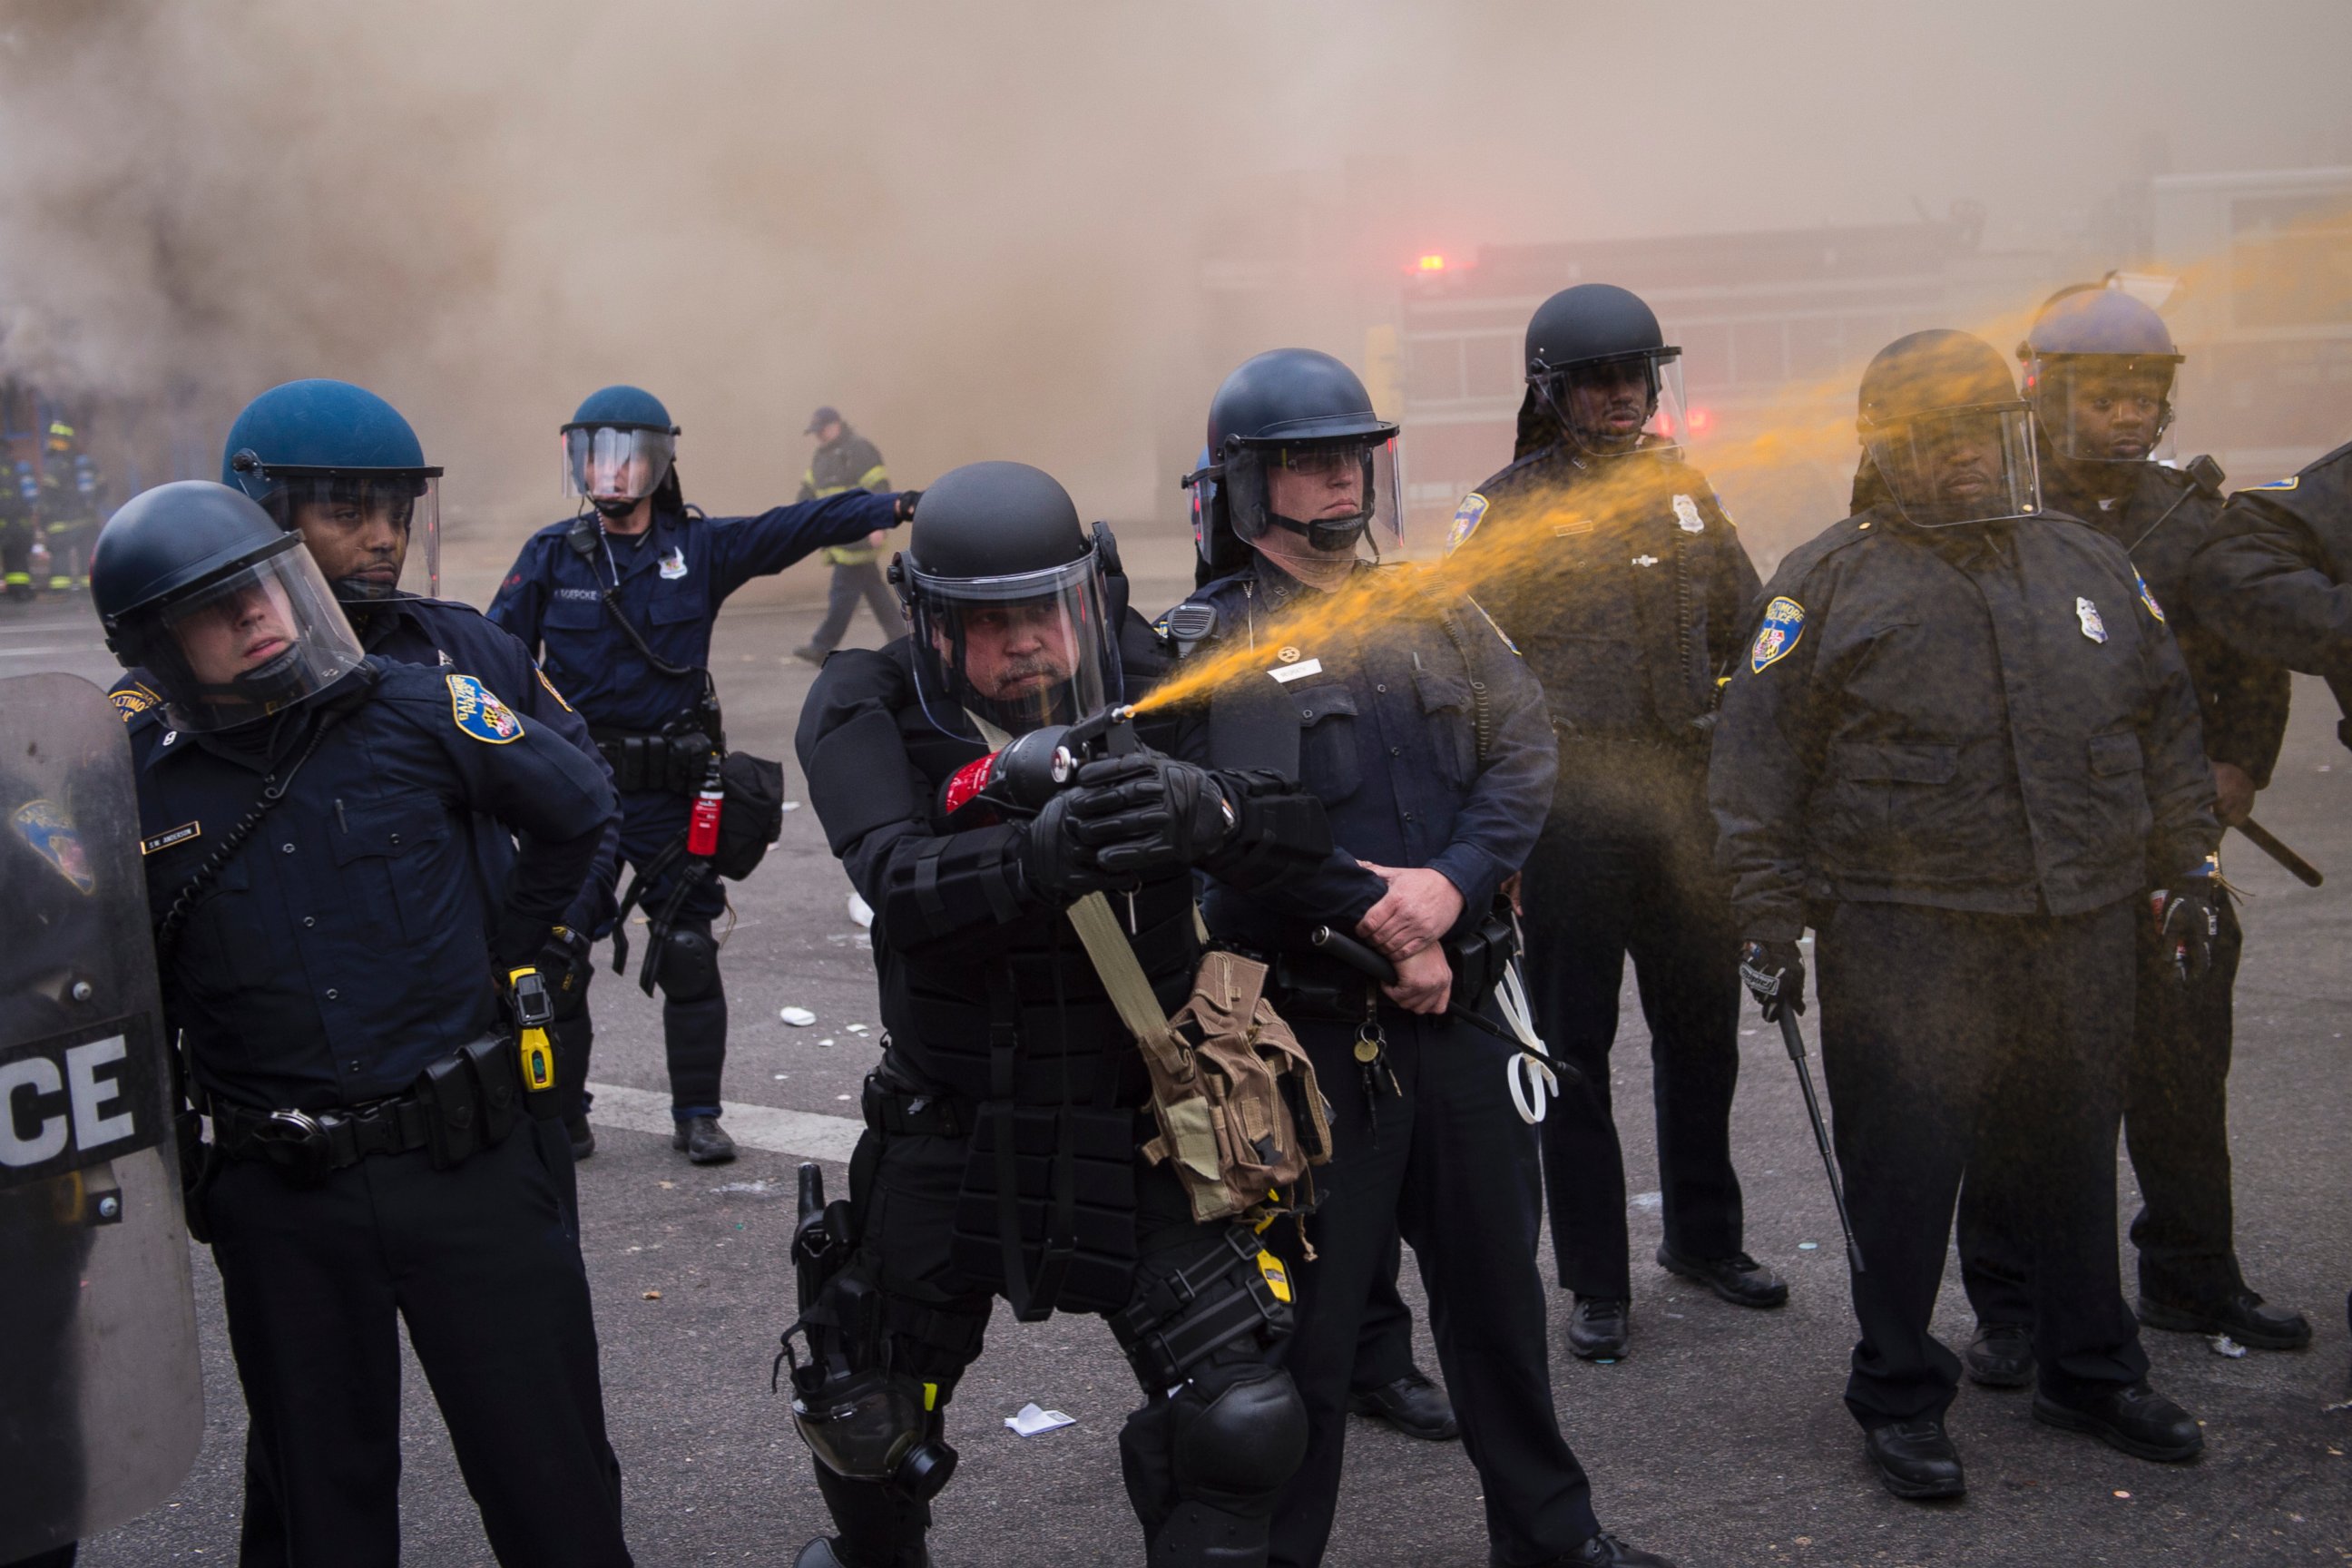 PHOTO: Officers pepper spray people near West North Avenue and Pennsylvania Avenue during a protest for Freddie Gray in Baltimore, Md. on April 27, 2015.